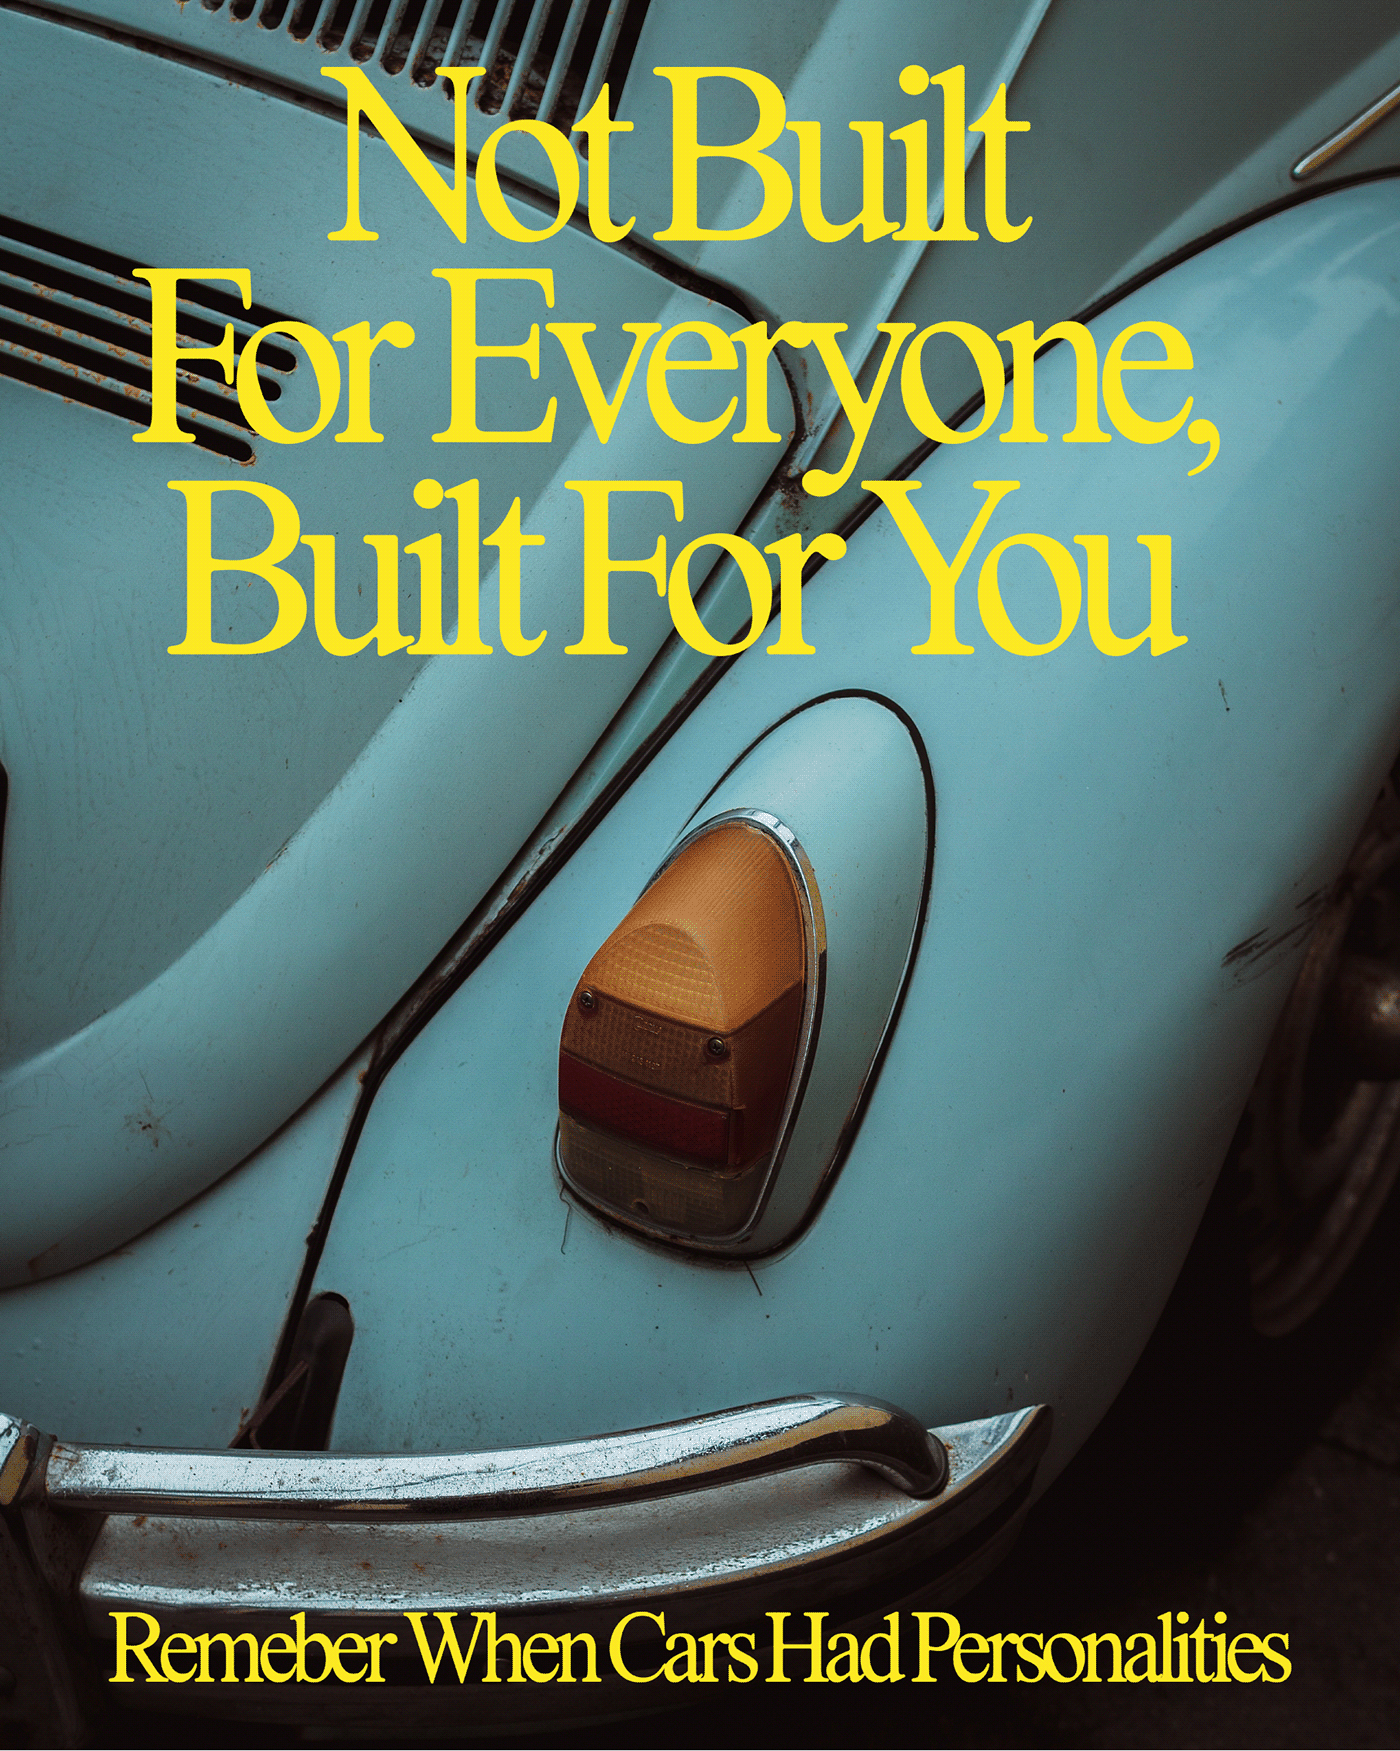 not built for everyone, built for you and a picture of a VW bug